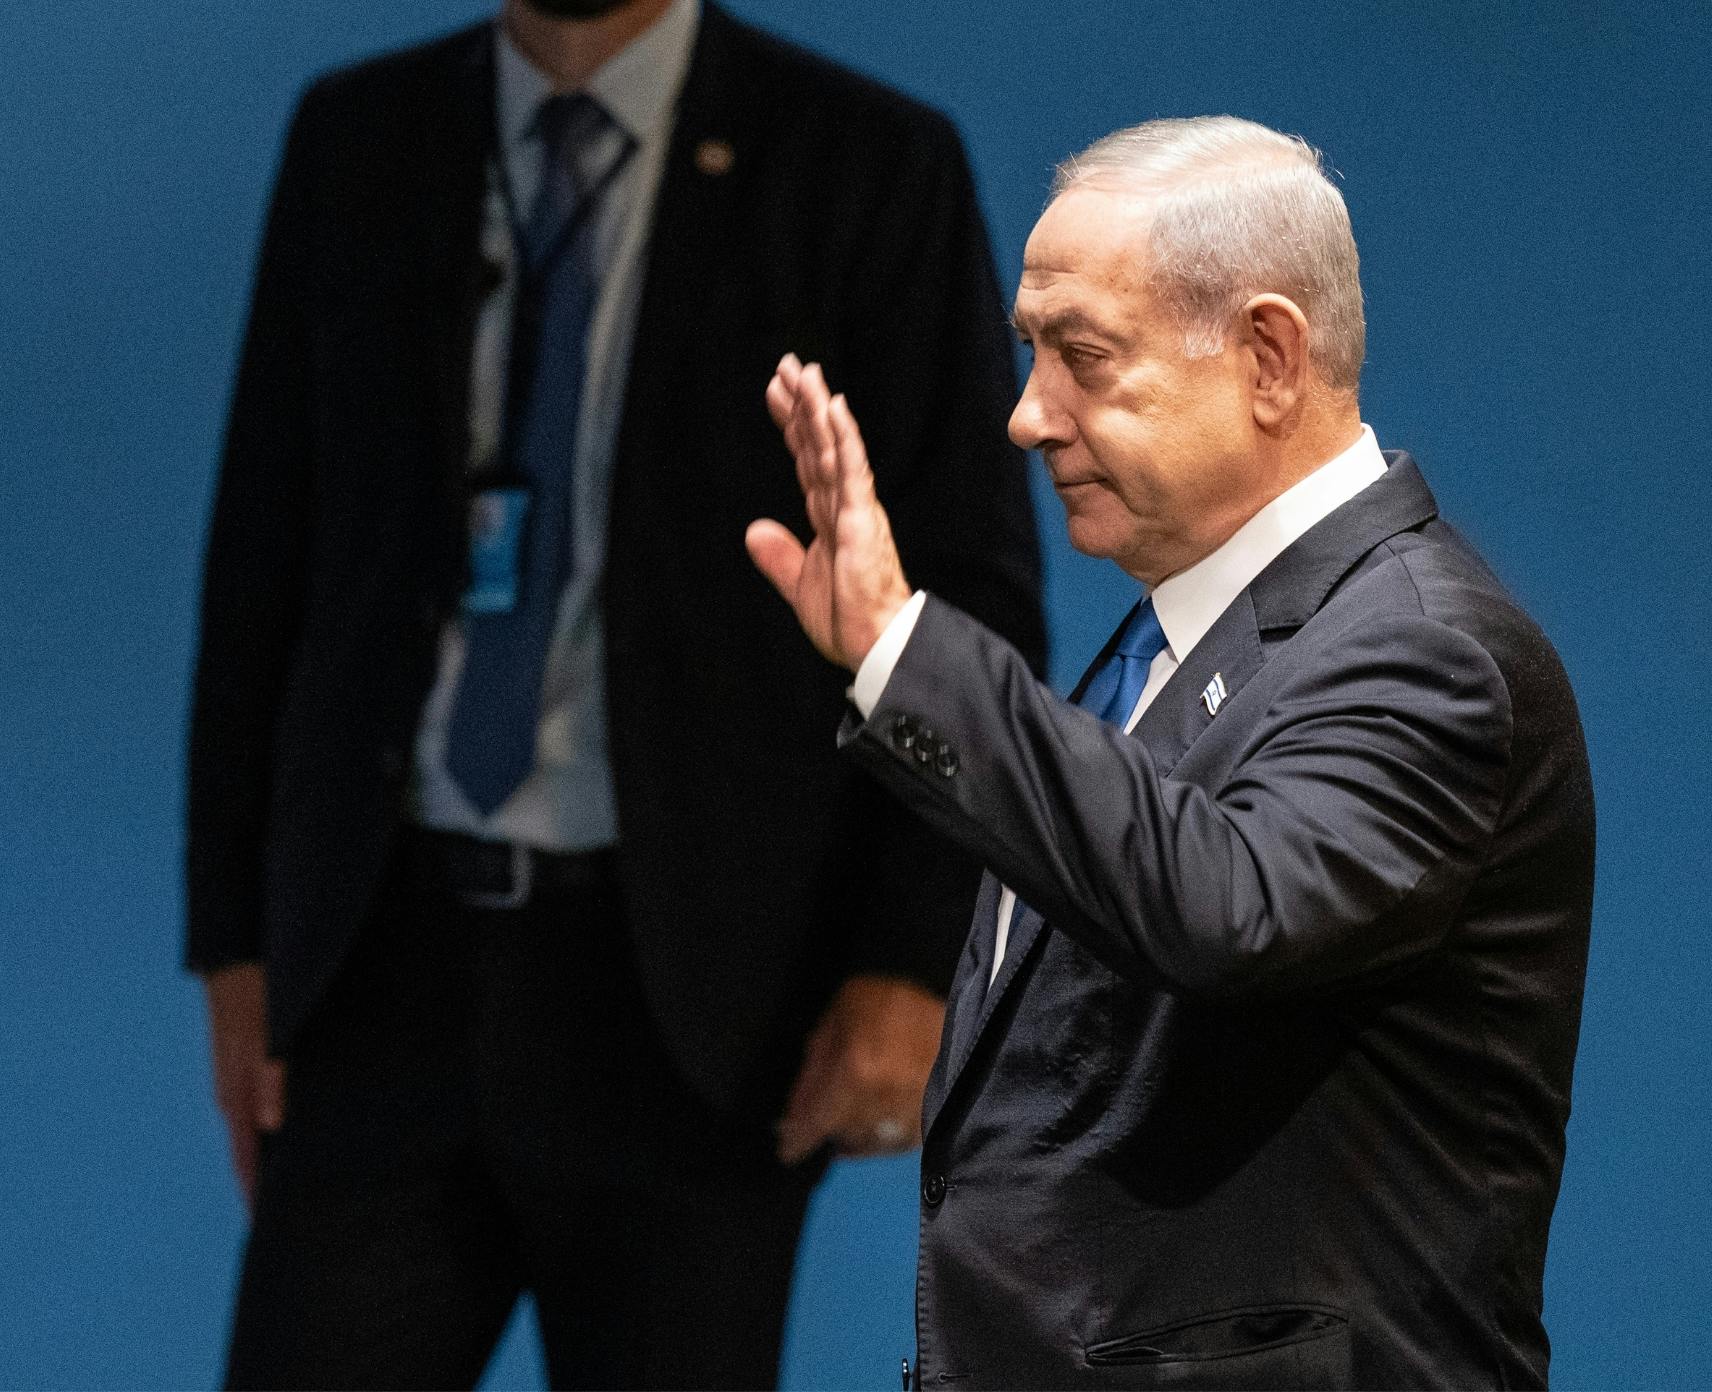 Prime Minister of Israel, Benjamin Netanyahu, waves as he leaves after speaking at the 78th Session of the UN General Assembly in New York, 22 September 2023